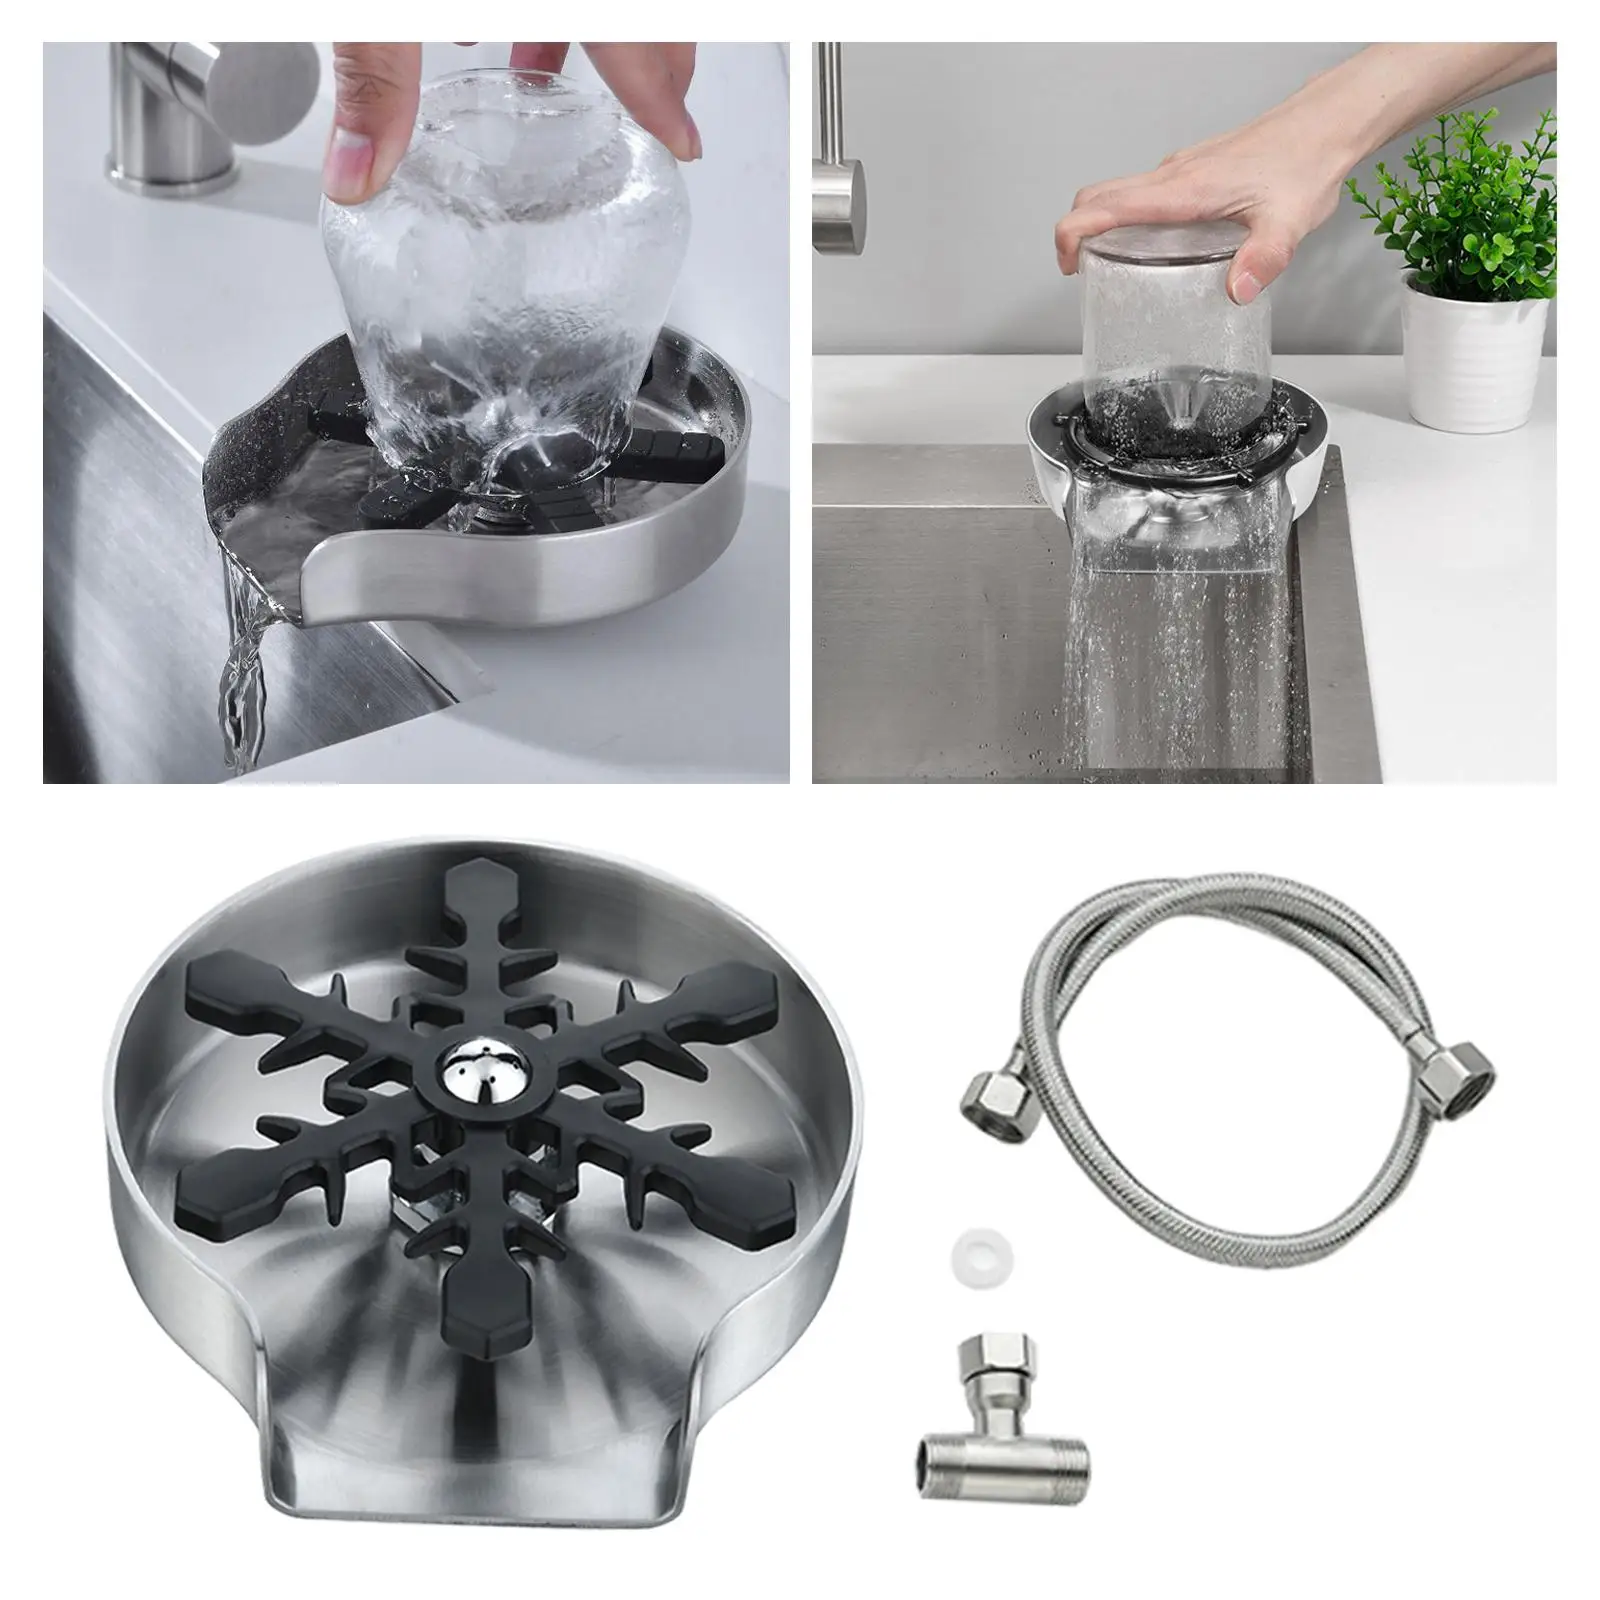 Automatic Cup Washer Cleaning Accessories Faucet Glass Washer Cleaner Durable Sinks Glass Washer for Home Restaurant Bar Tea Cup